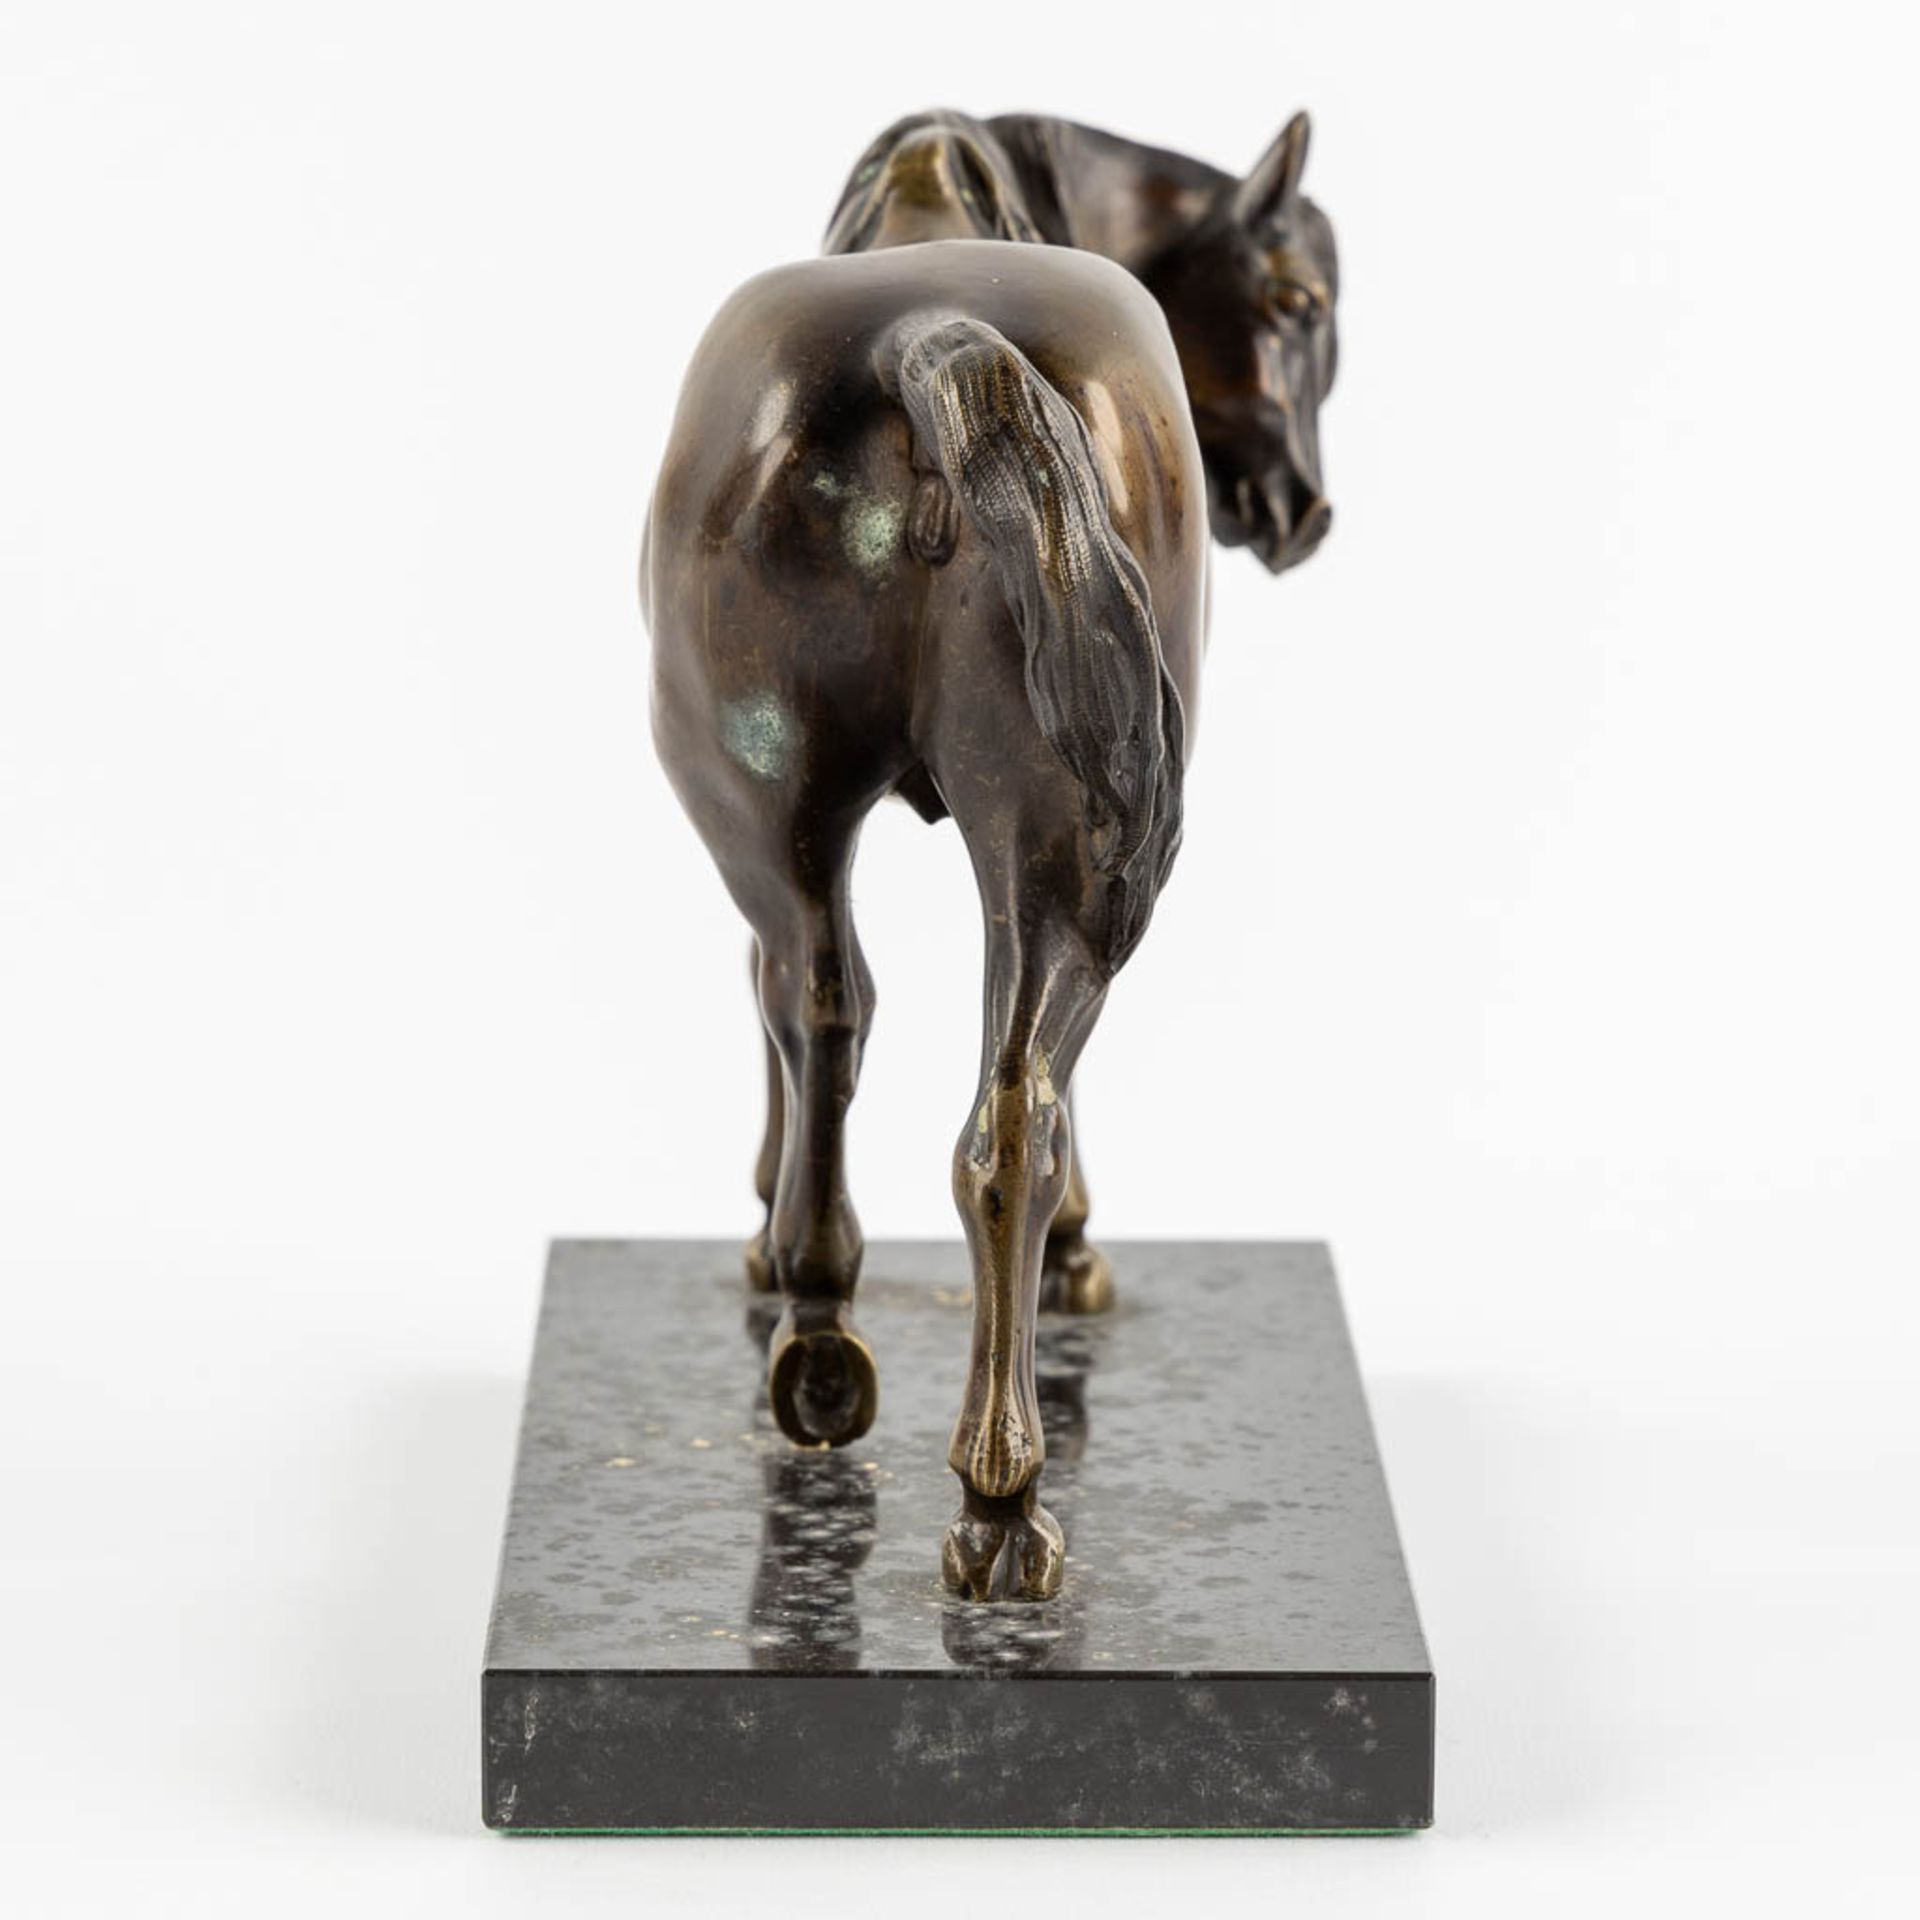 A patinated bronze figurine of a horse, black marble. (L:11 x W:27 x H:18 cm) - Image 4 of 9